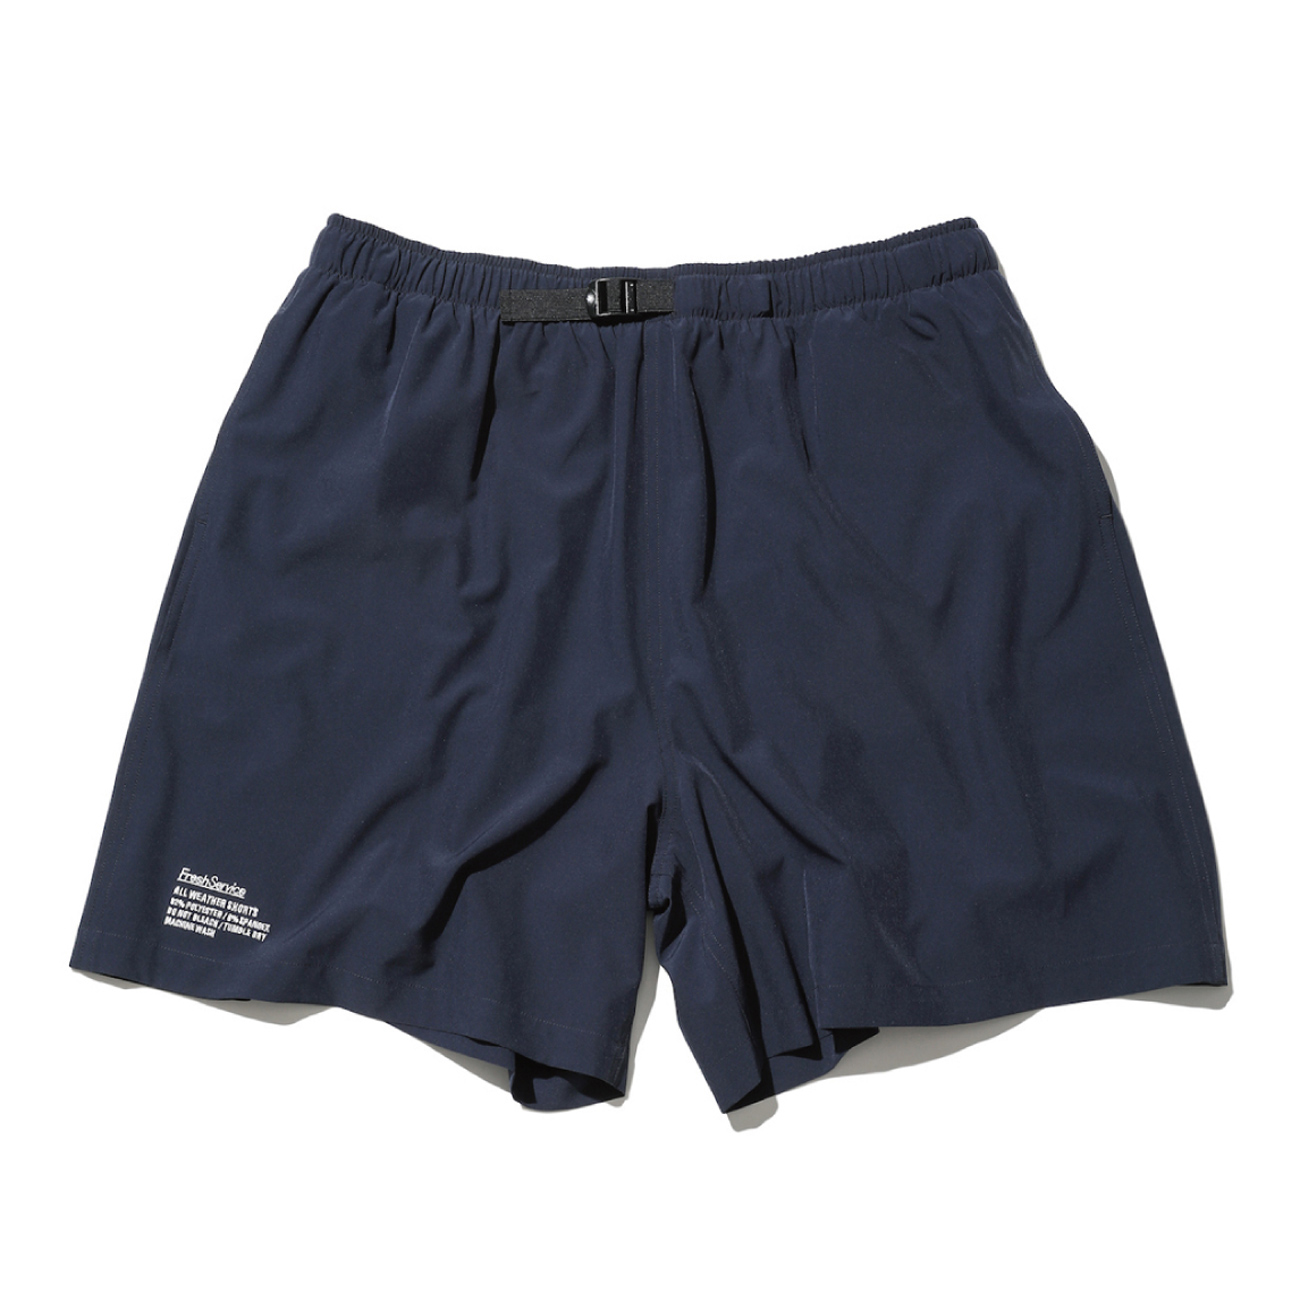 ALL WEATHER SHORTS - Navy